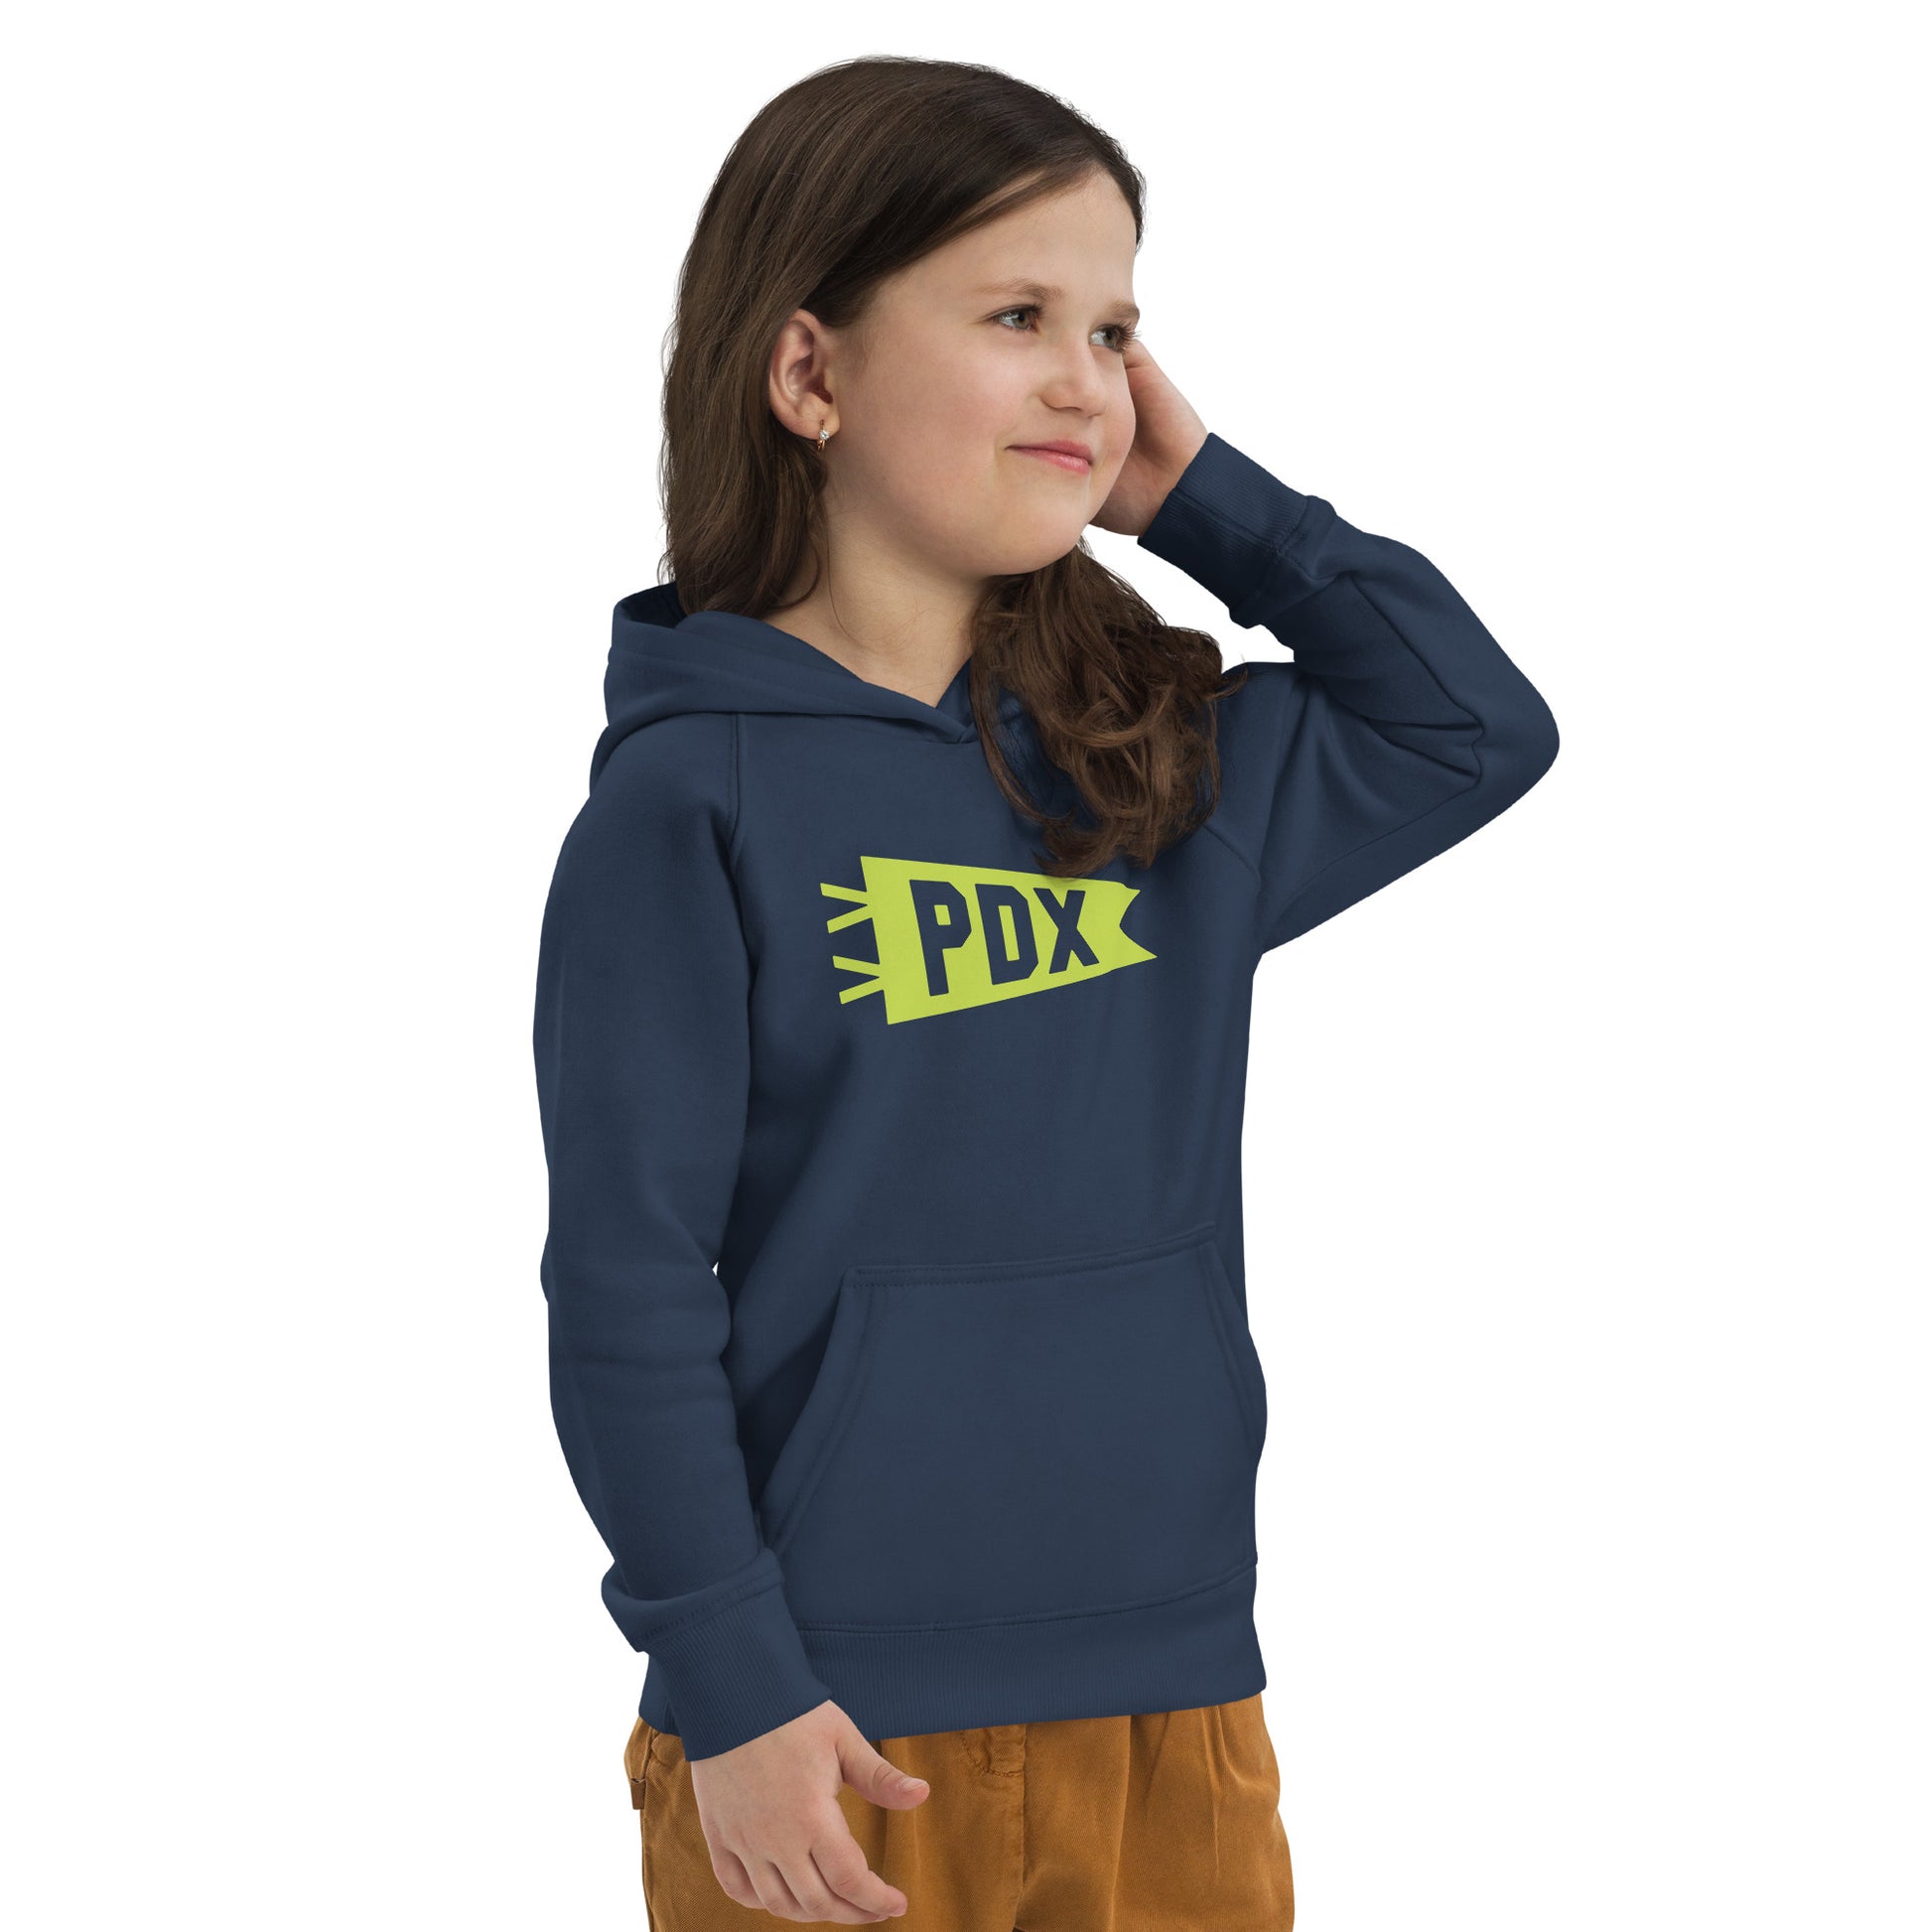 Kid's Sustainable Hoodie - Green Graphic • PDX Portland • YHM Designs - Image 06